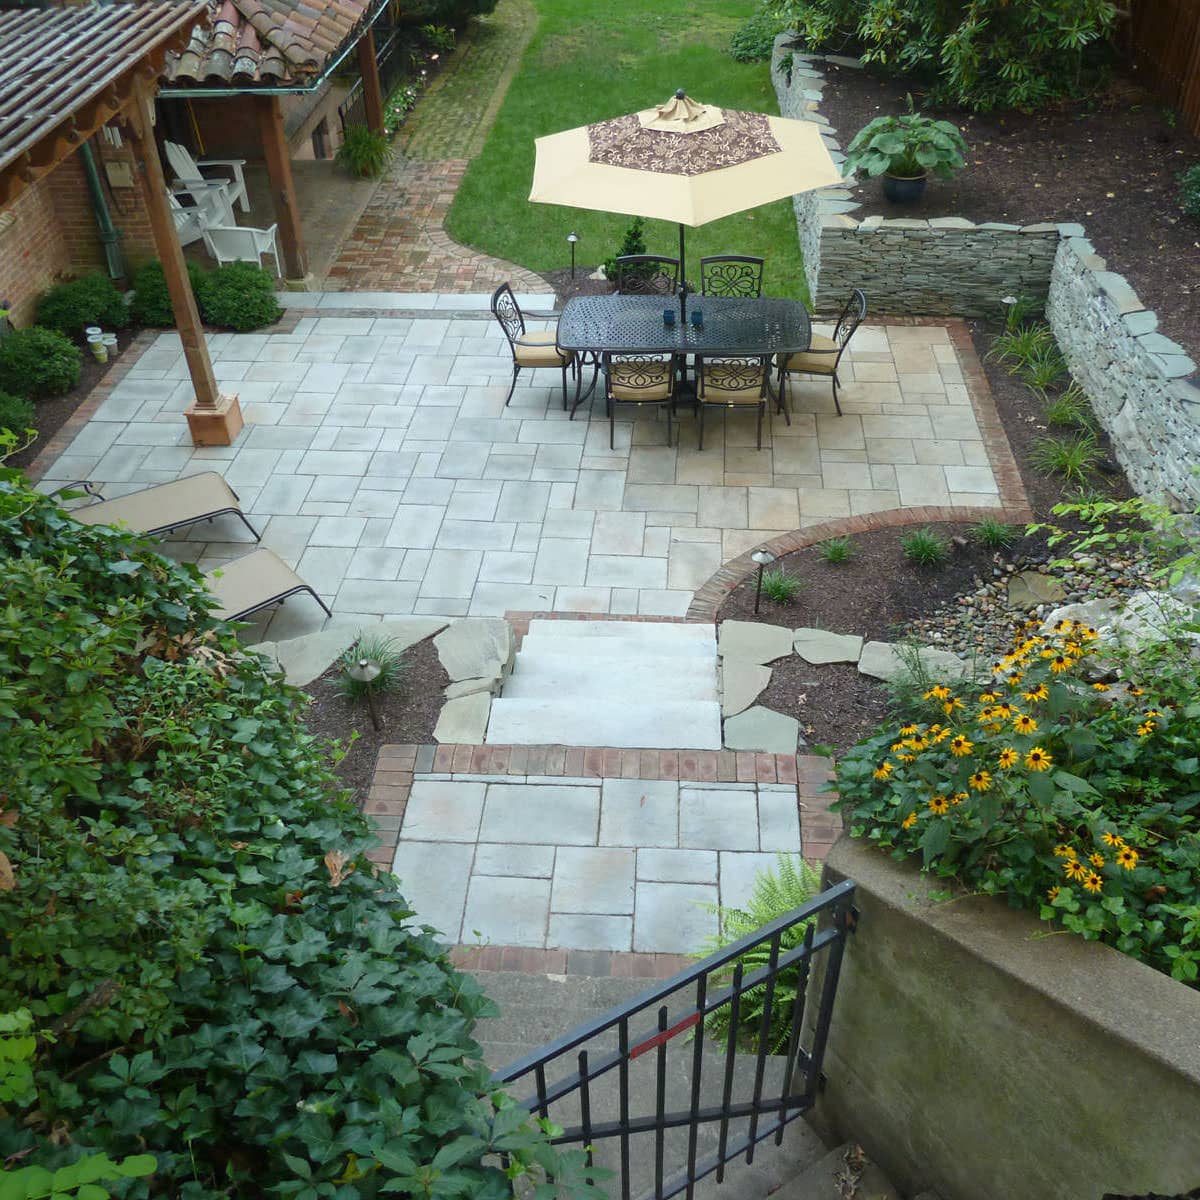 This outdoor living project in Easton, PA had its challenges, but creative design and precision installation helped this historical home come back to life!